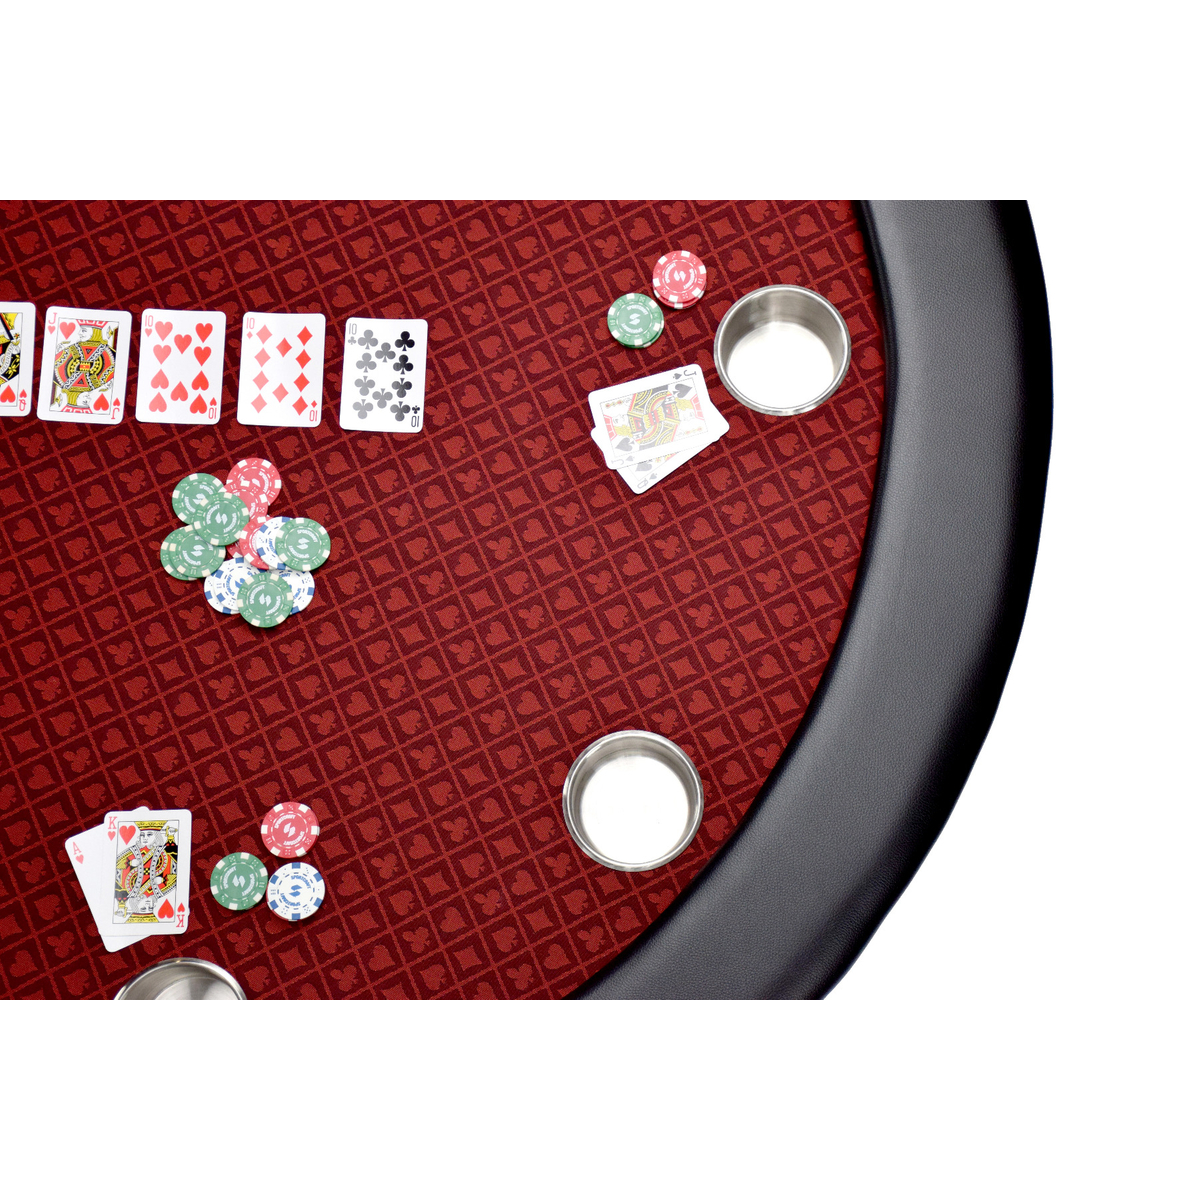 North Round Poker Table Texas 8 personnes Rouge